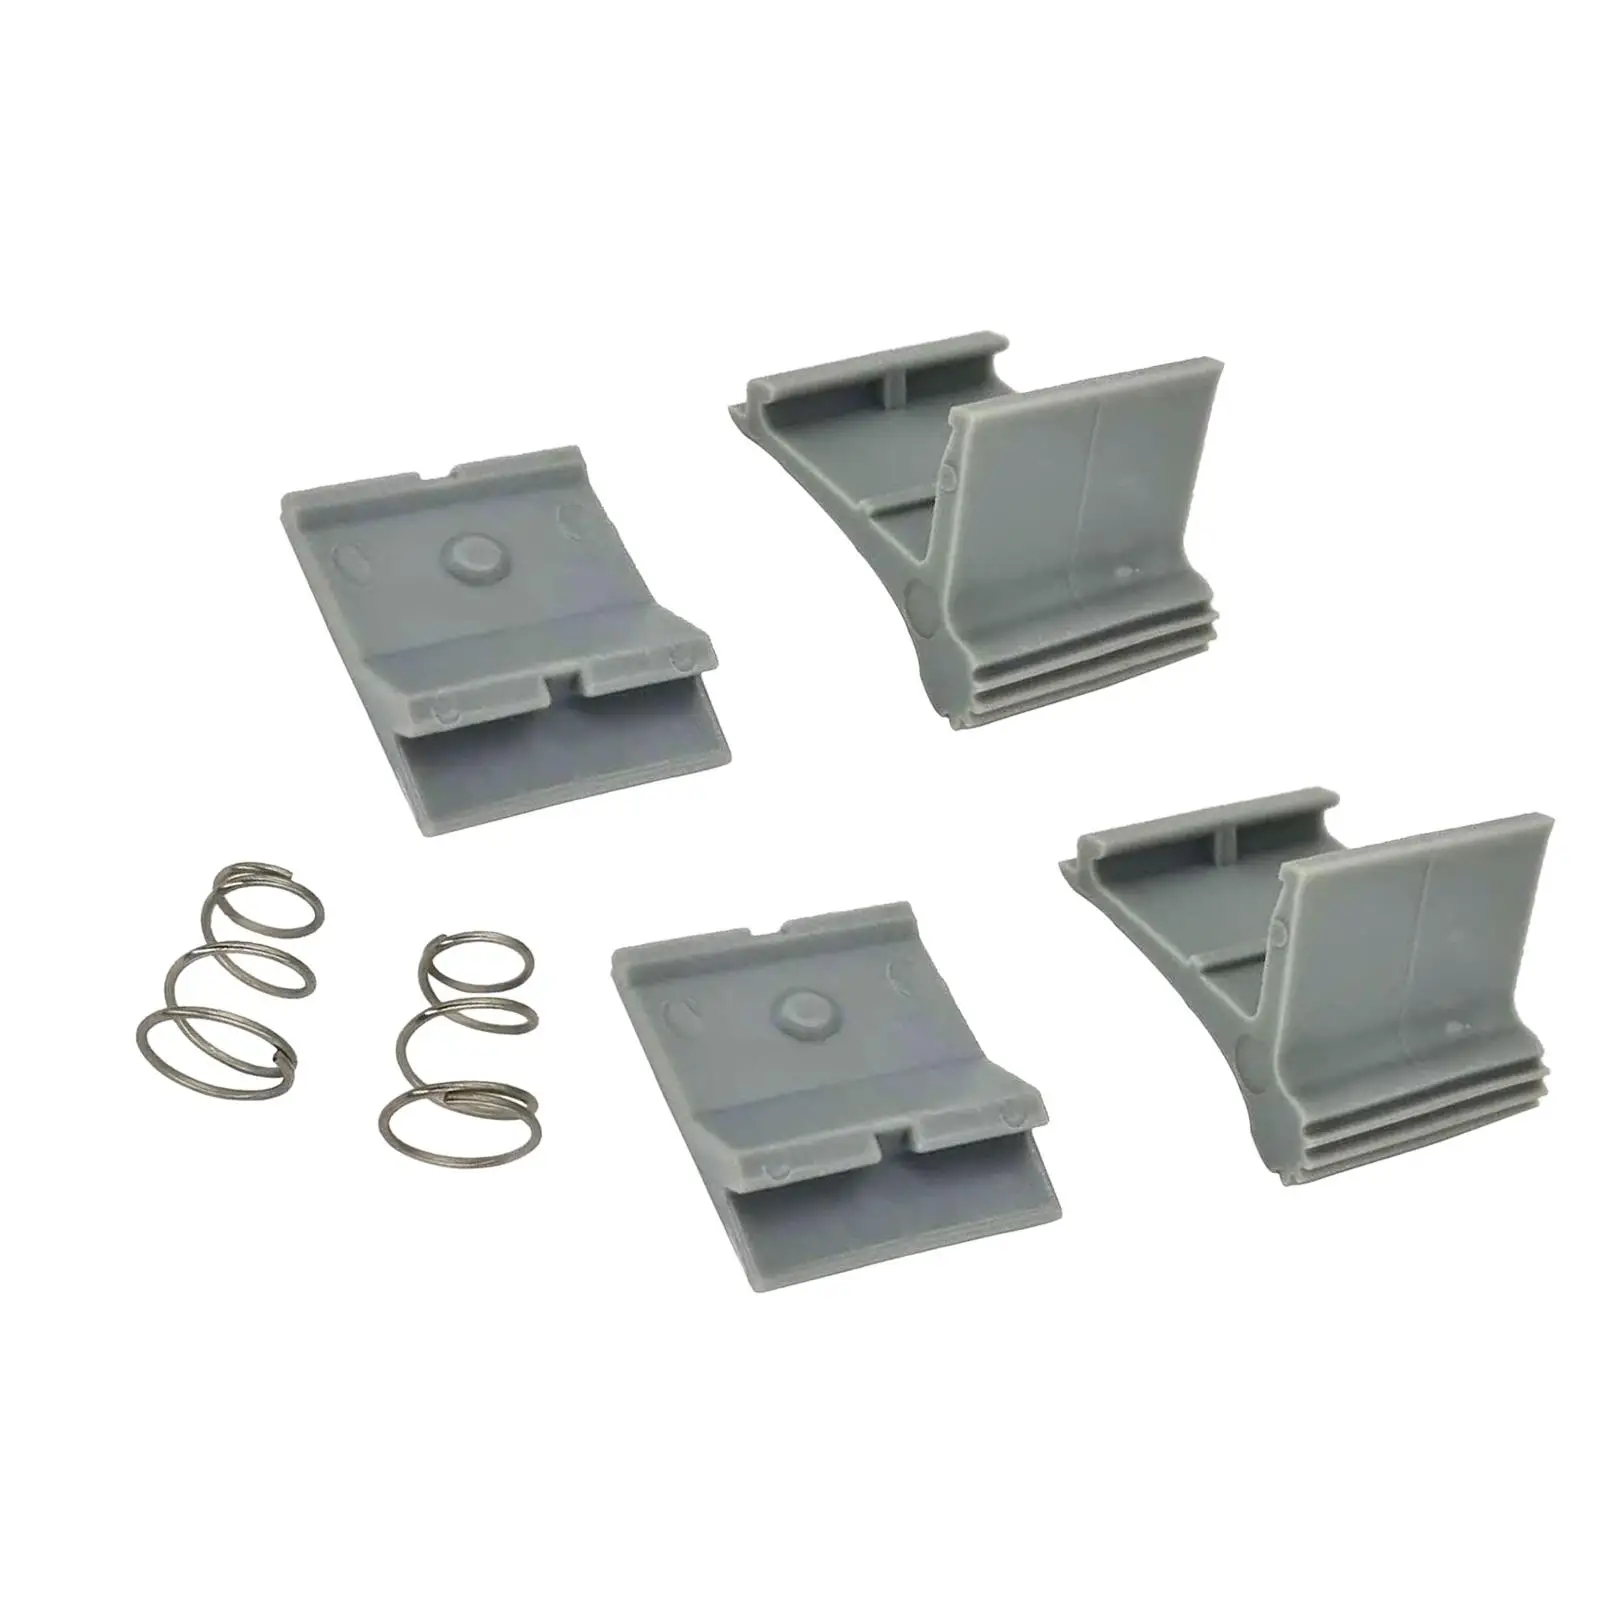 Awning Arm Slider Catch Set with 2 Springs 4 Slider Catch Spare Parts Accessories Replacement Easy to Install for Motorhome